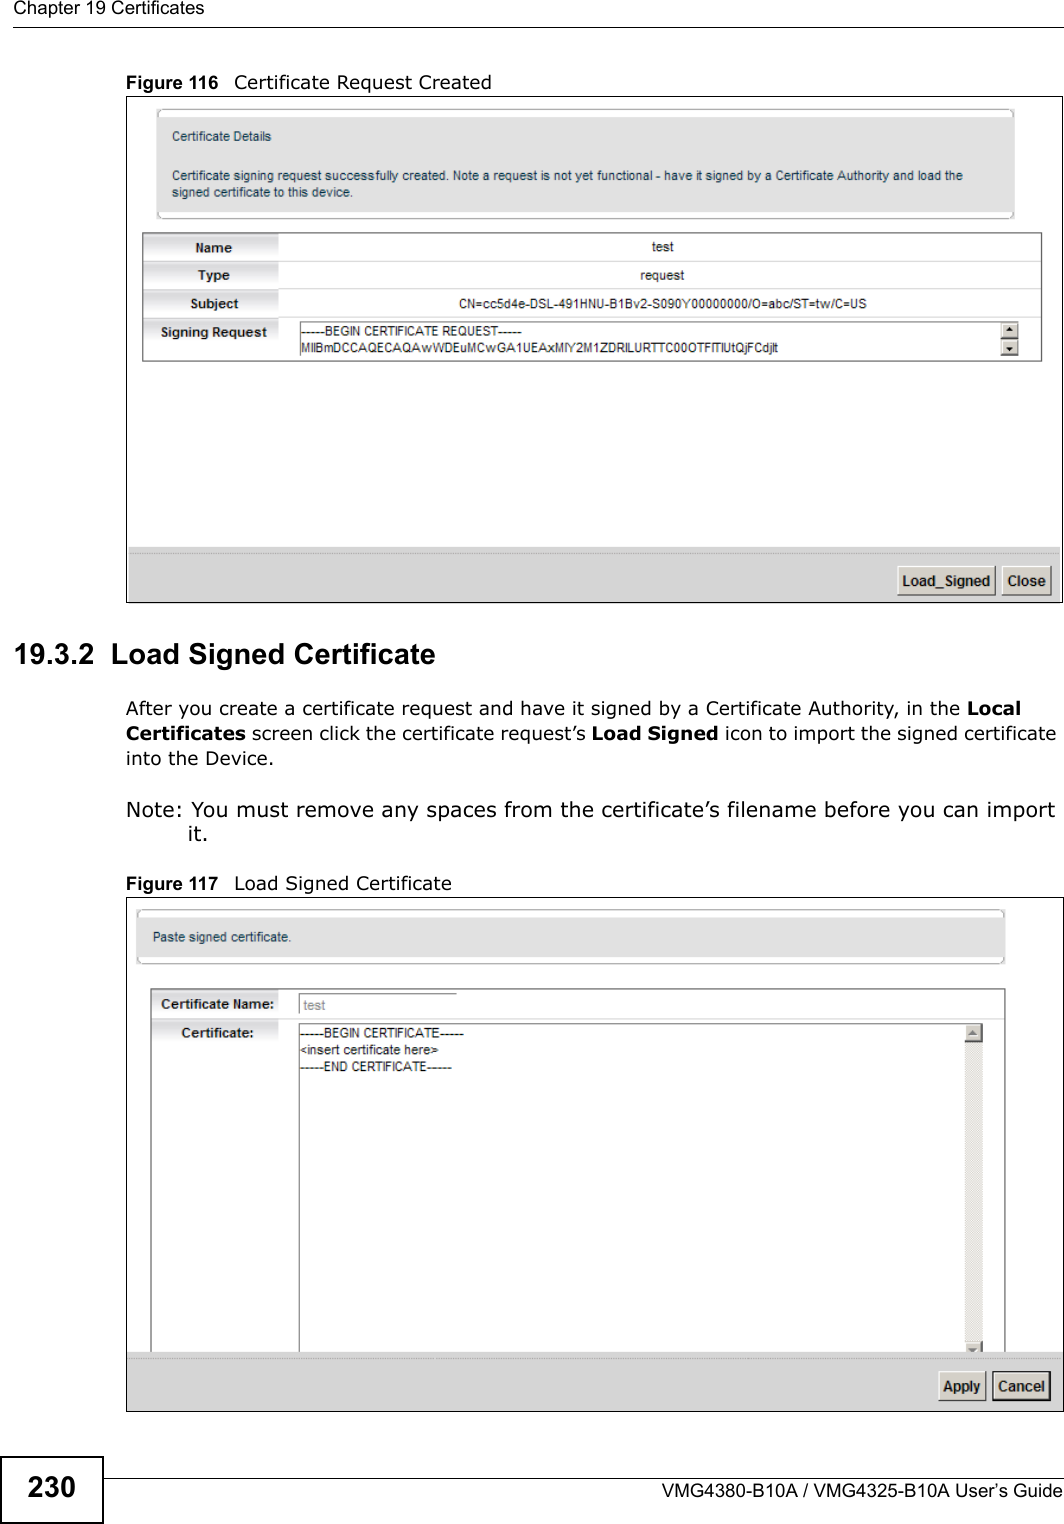 Chapter 19 CertificatesVMG4380-B10A / VMG4325-B10A User’s Guide230Figure 116  Certificate Request Created19.3.2  Load Signed Certificate After you create a certificate request and have it signed by a Certificate Authority, in the Local Certificates screen click the certificate request’s Load Signed icon to import the signed certificate into the Device. Note: You must remove any spaces from the certificate’s filename before you can importit.Figure 117   Load Signed Certificate 